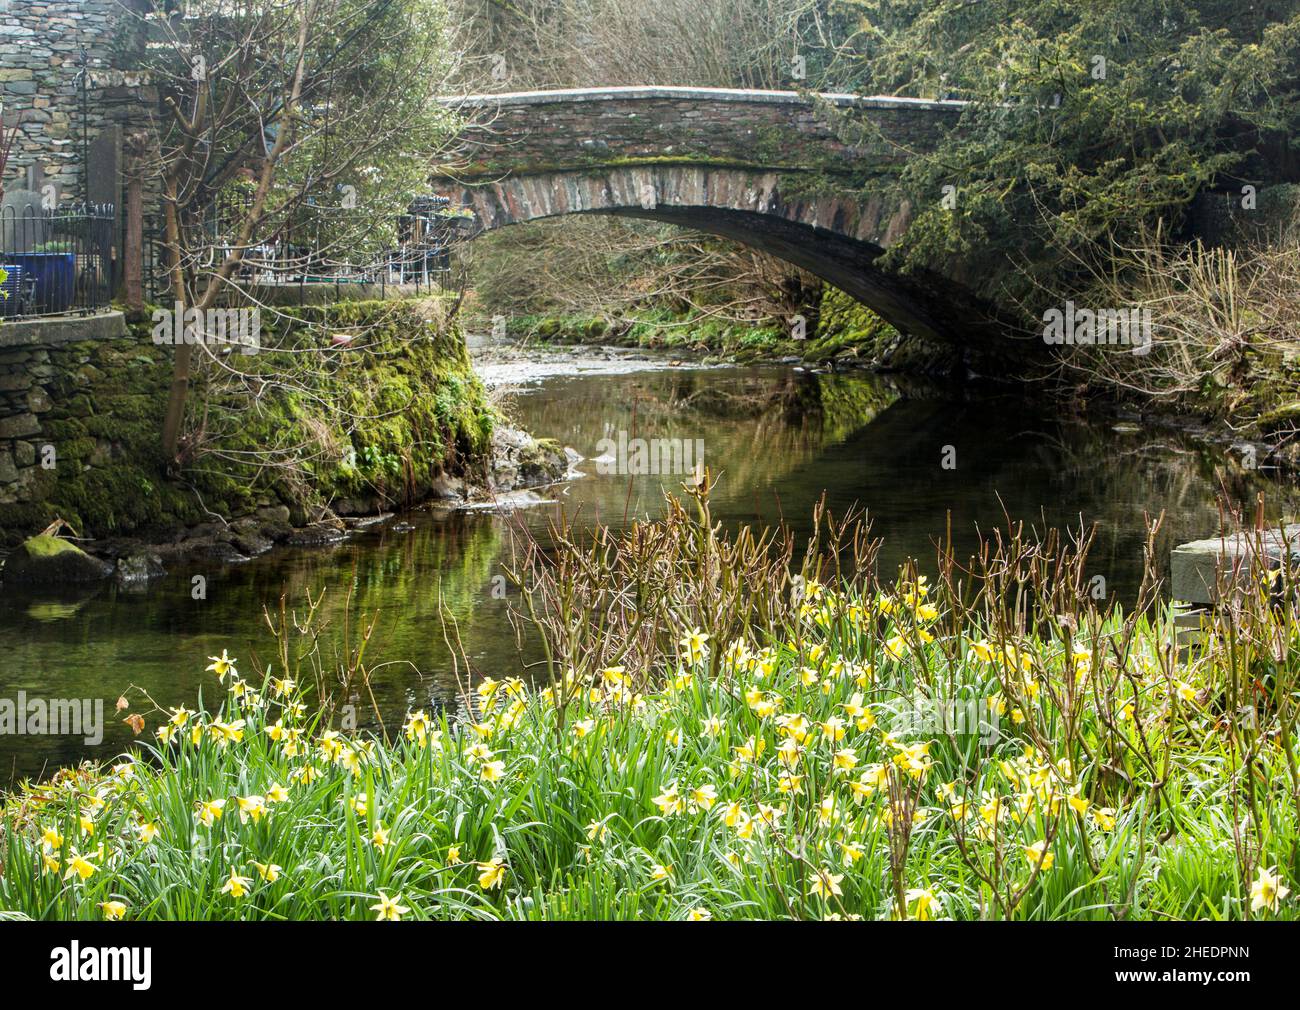 Grasmere Bridge & wild daffodils beside the River Rothay in the Wordsworth Memorial Garden Grasmere, The Lake District National Park, Cumbria, England Stock Photo